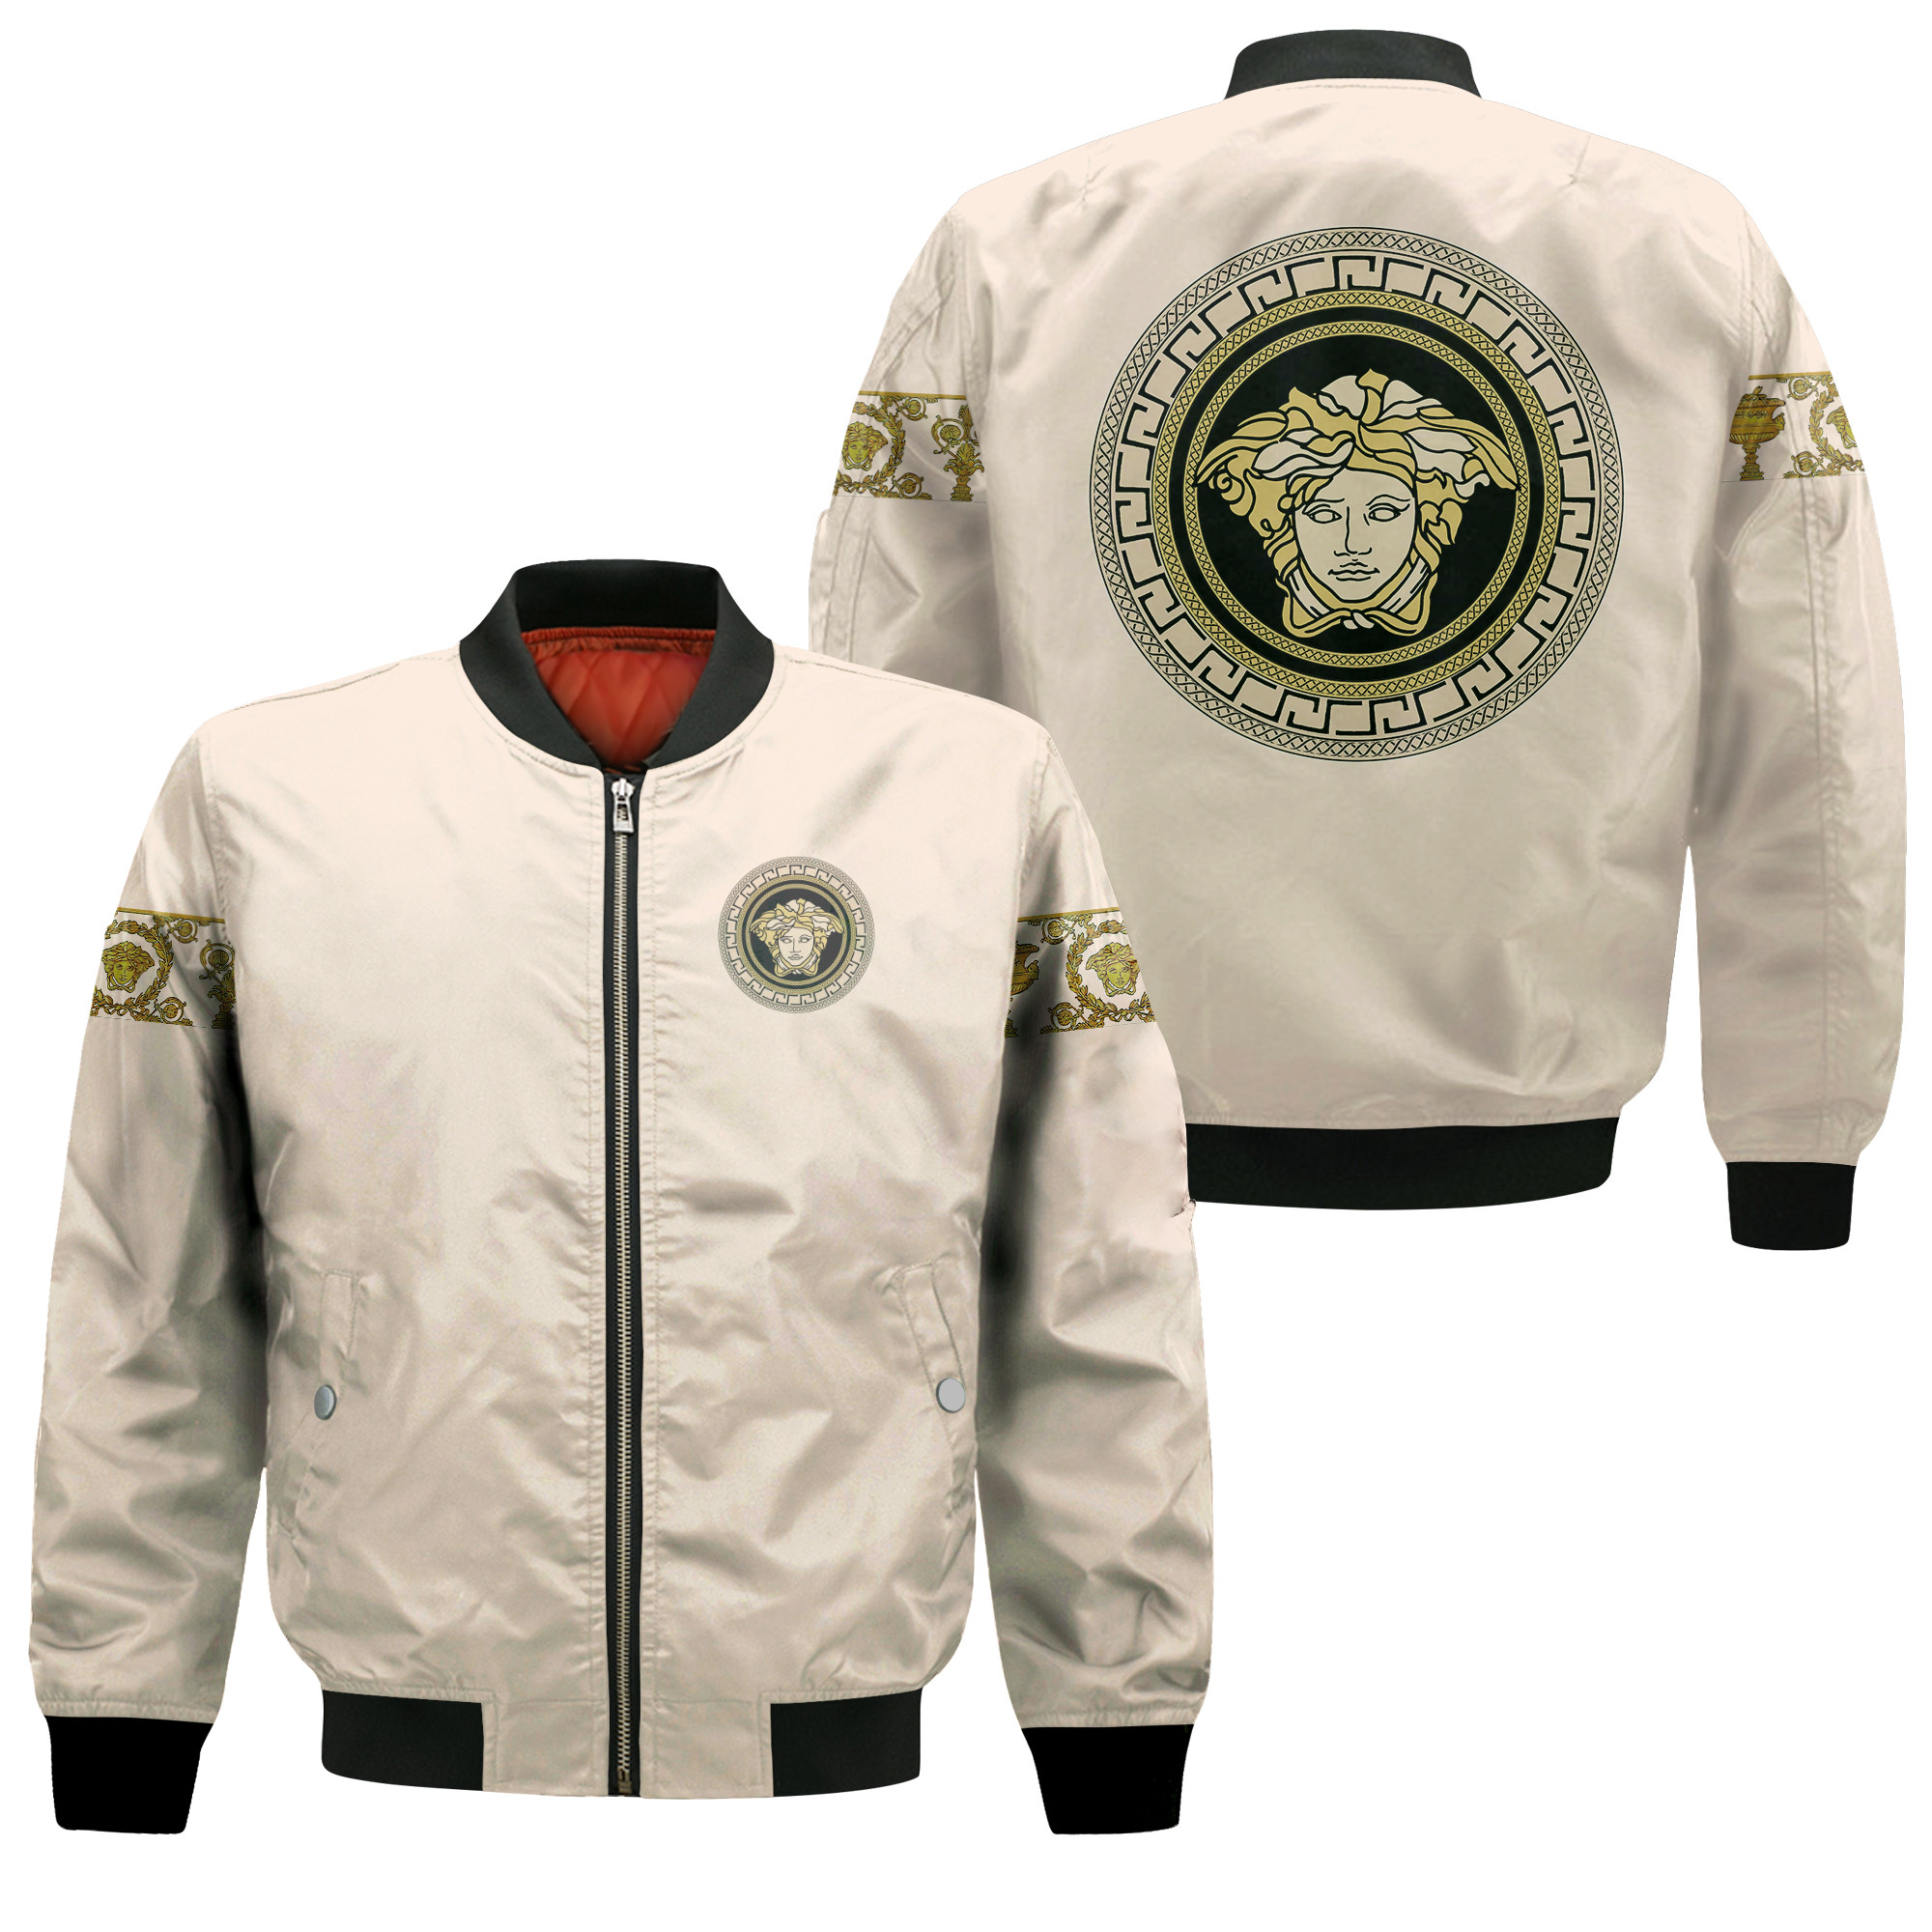 Get yourself an anime bomber jacket! 227